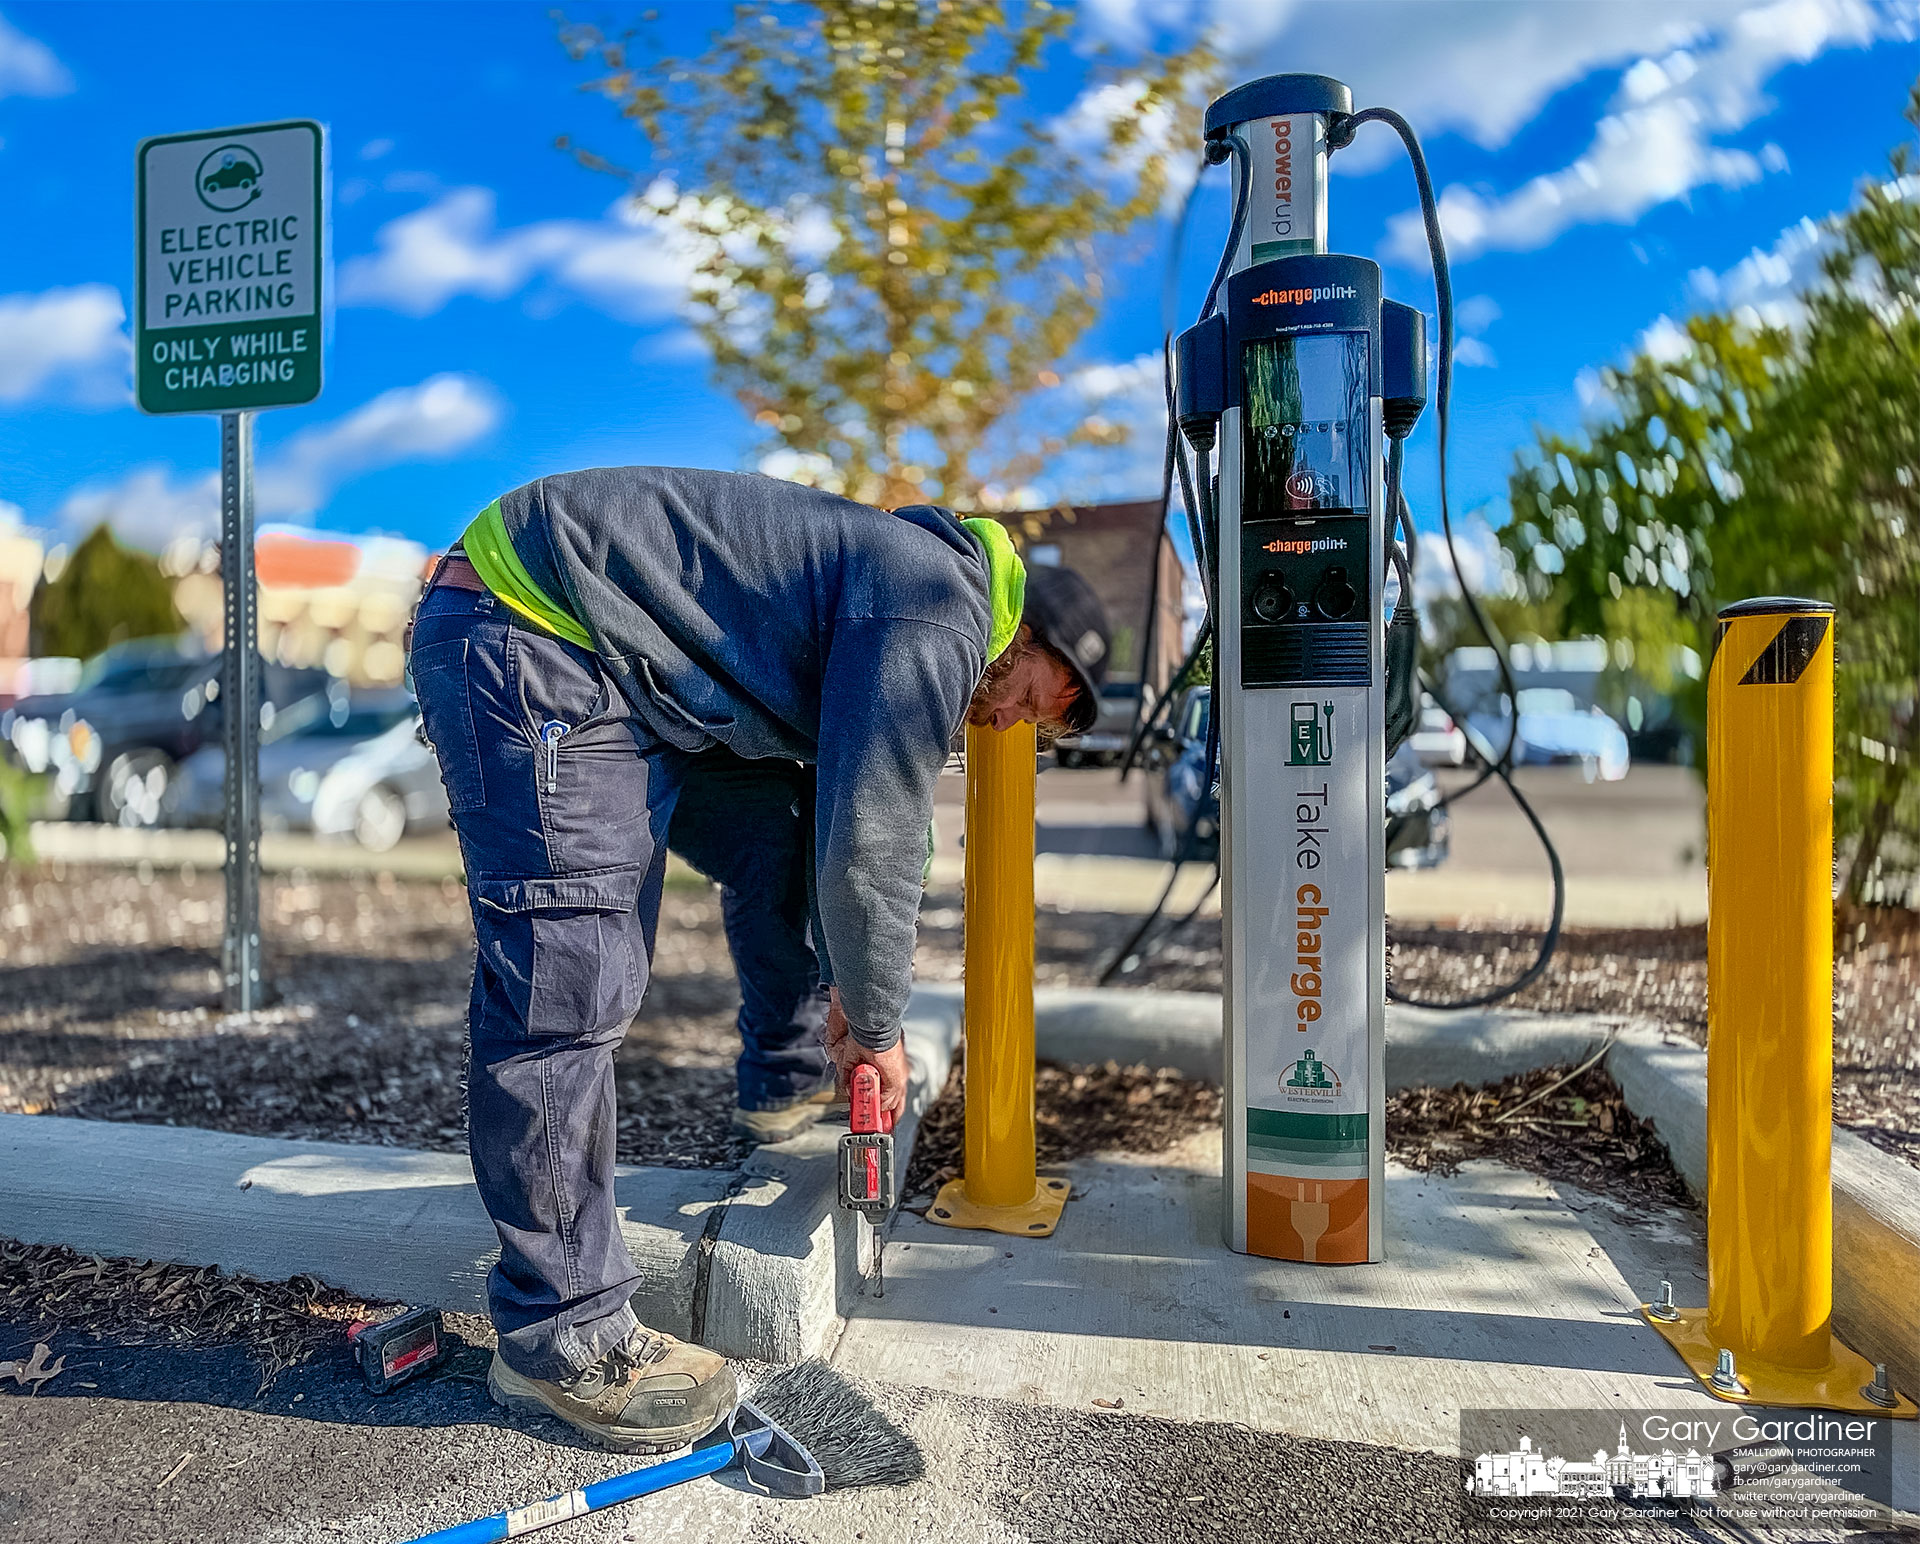 A technician installs a bollard to guard damage to one of the two new electric vehicle charging stations installed in the new parking lot behind city hall. My Final Photo for Nov. 2, 2021.